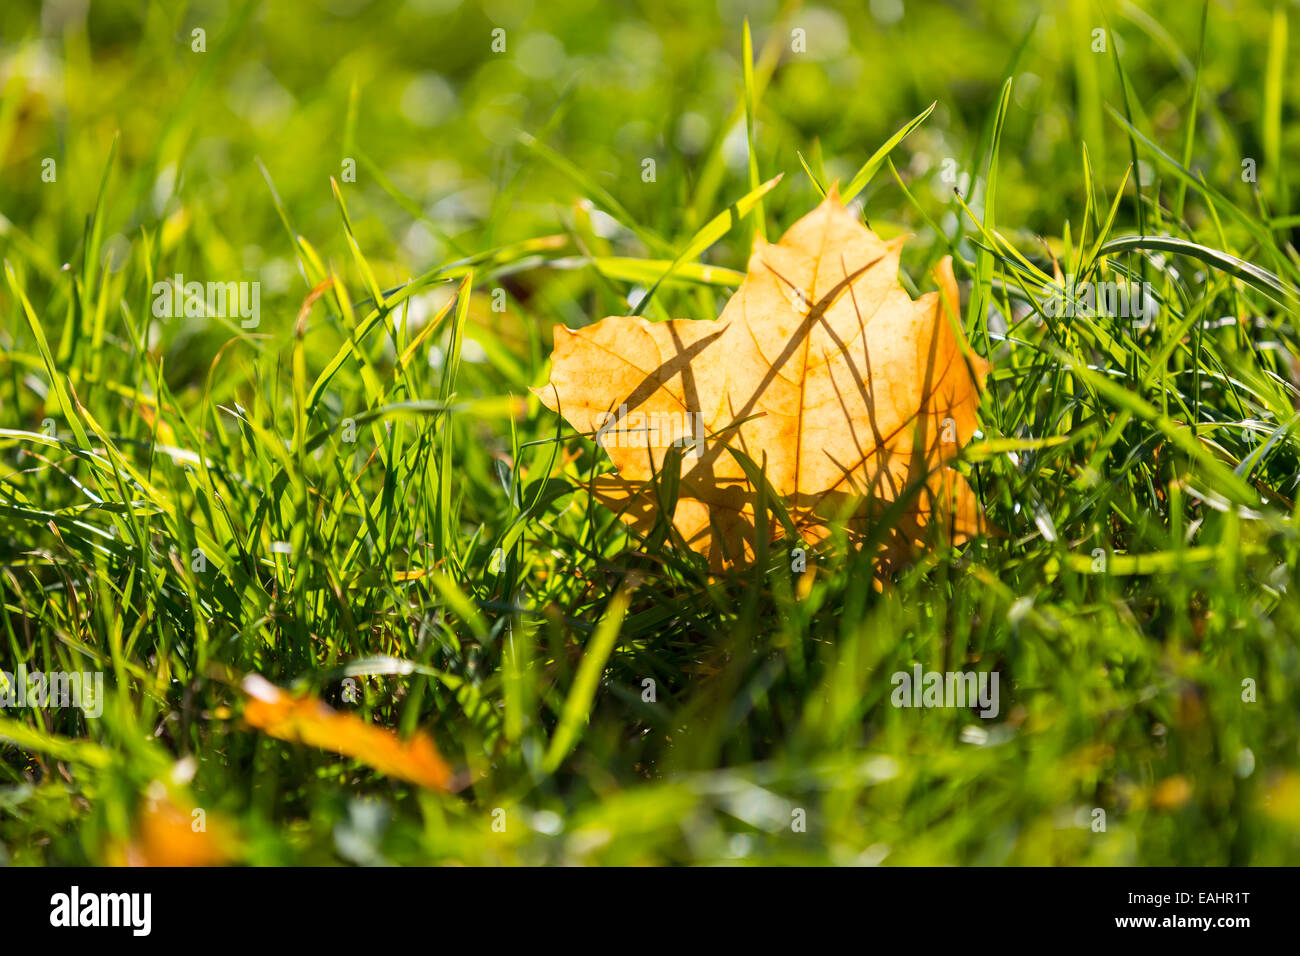 Close up lawn with fallen autumnal leaves Stock Photo